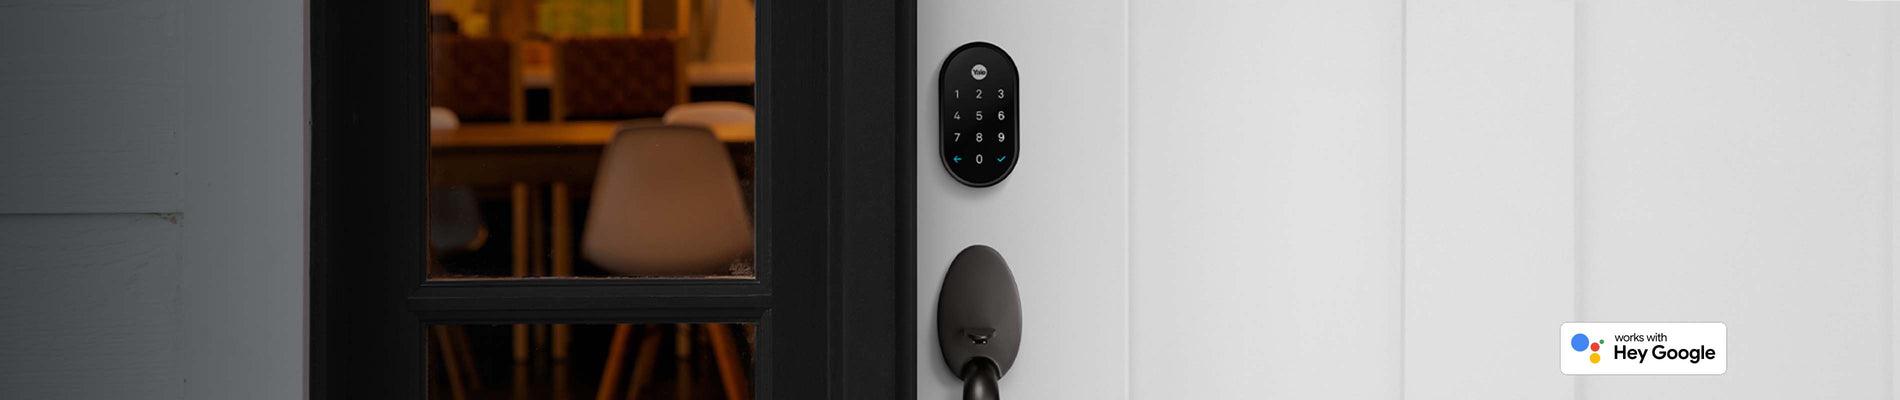 Nest x Yale Lock on front door to secure your house & works with Hey Google